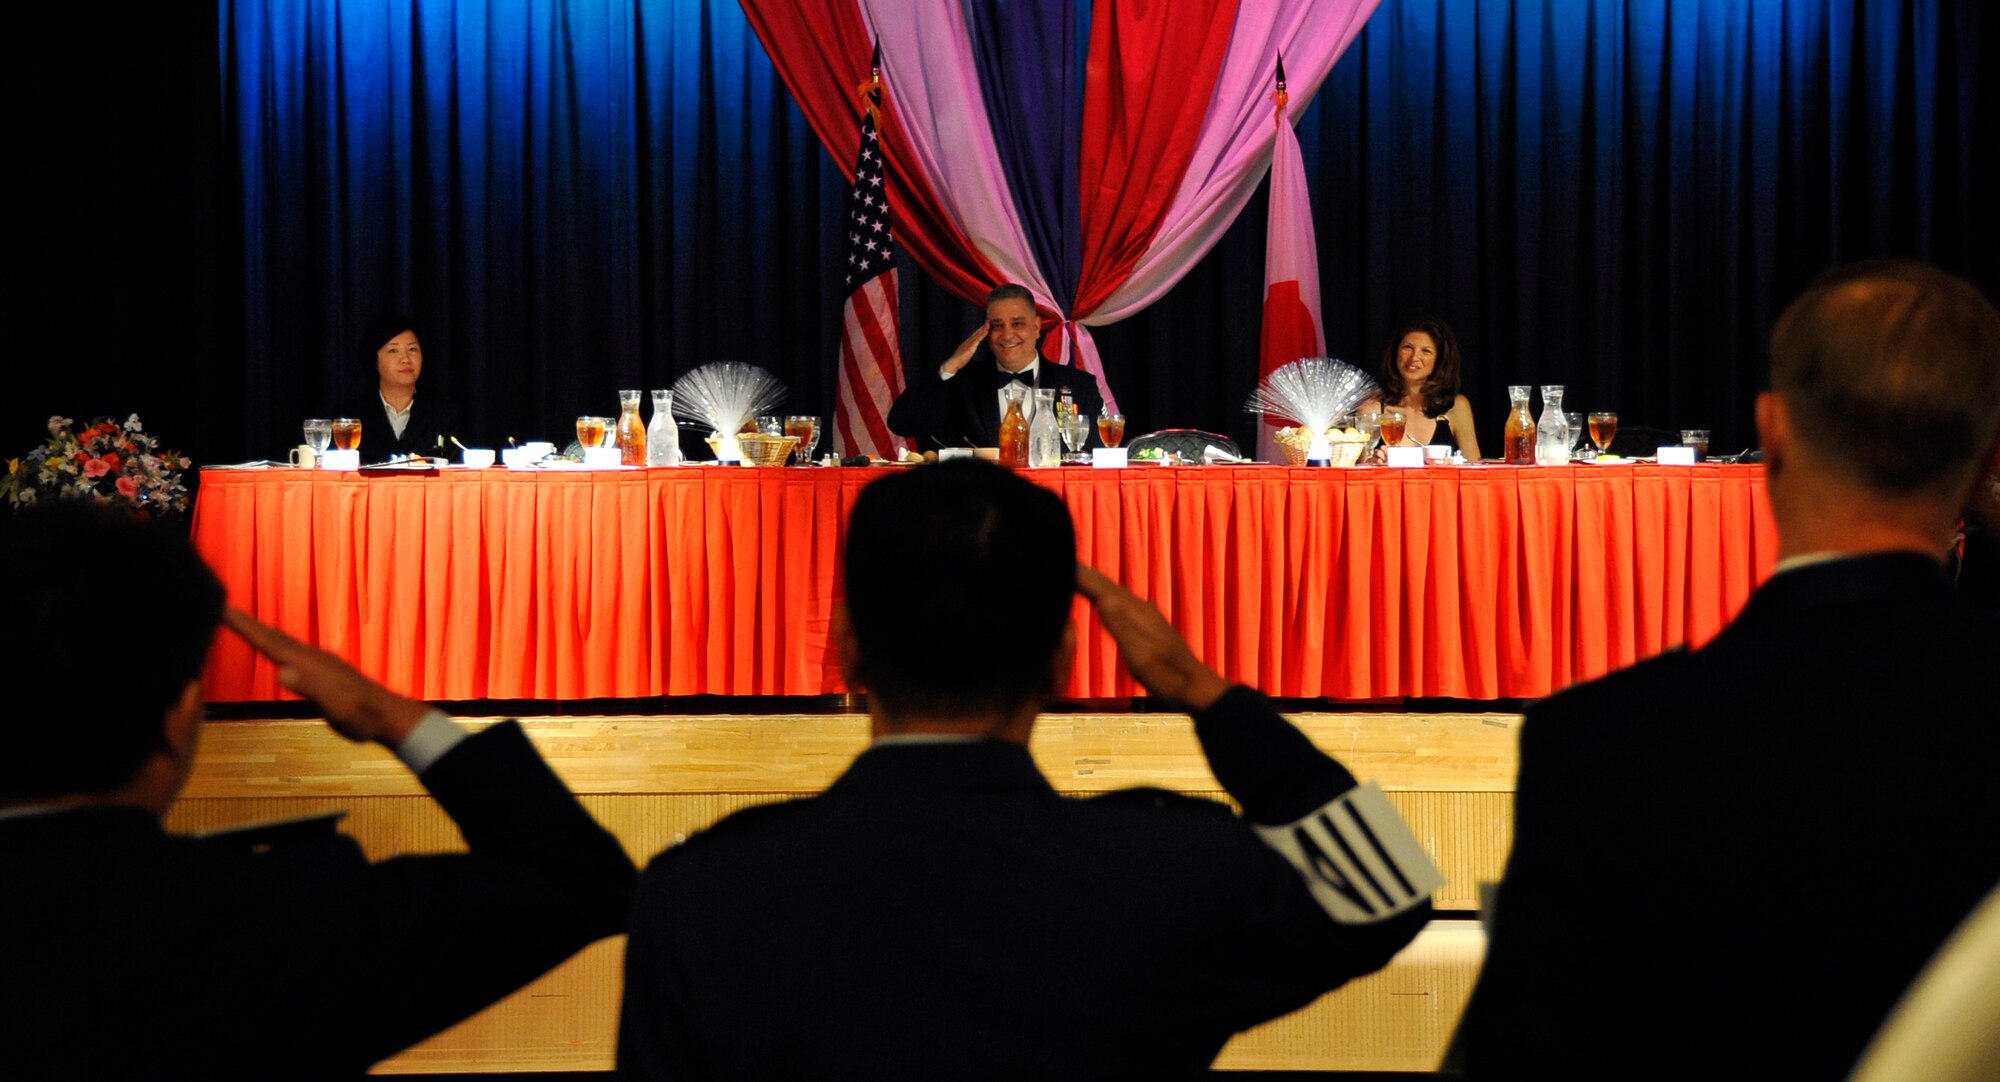 MISAWA AIR BASE, Japan – During the 3rd Annual Bilateral Enlisted Dining-Out, Col. RC Craig, 35th Fighter Wing vice commander, and Japan Air Self-Defense Force officers face the head table after drinking from the “grog bowl,” June 5, 2009. This event marks Chief Price’s last dining-out; he retires from the Air Force June 19. (U.S. Air Force photo by Senior Airman Chad C. Strohmeyer)